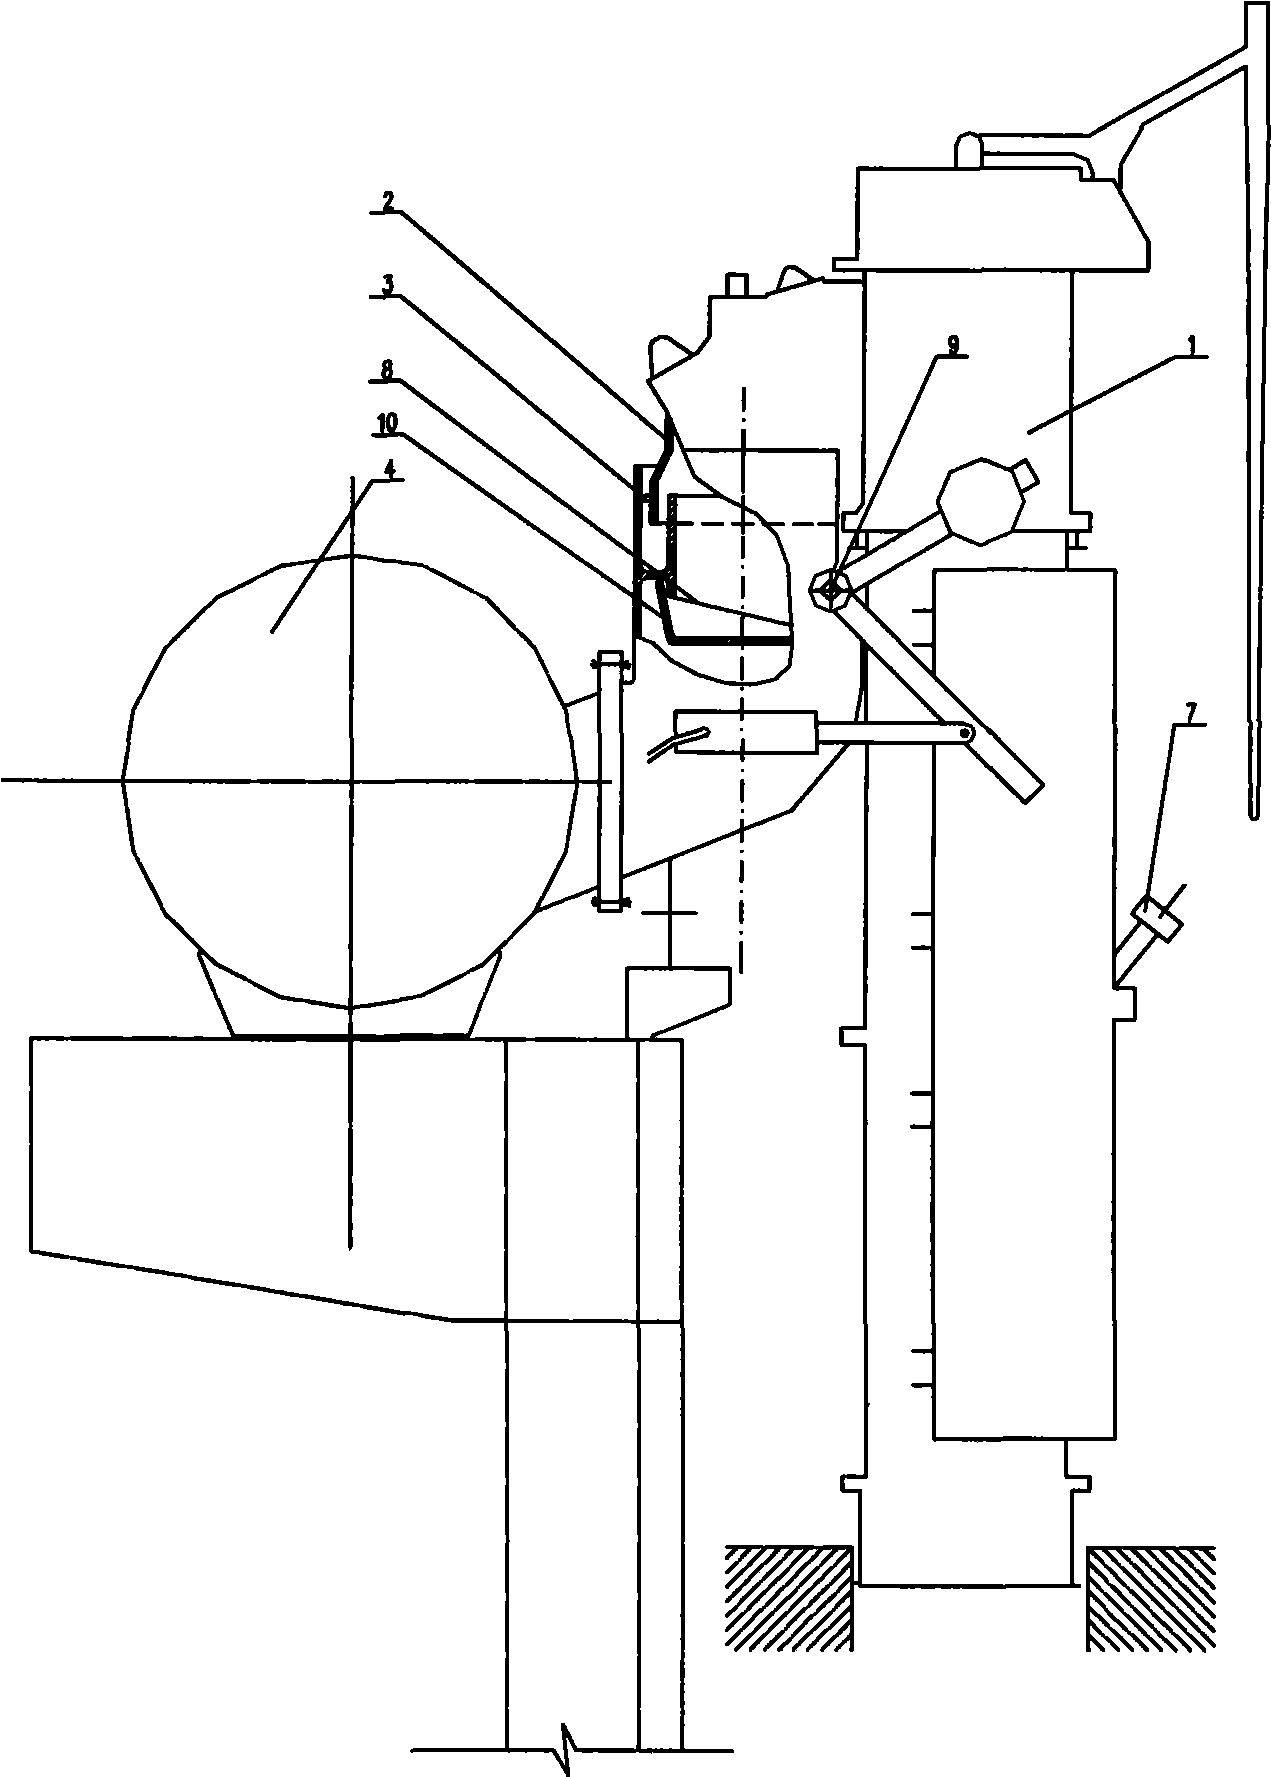 Automatic pressure regulating method and device for coke oven chamber